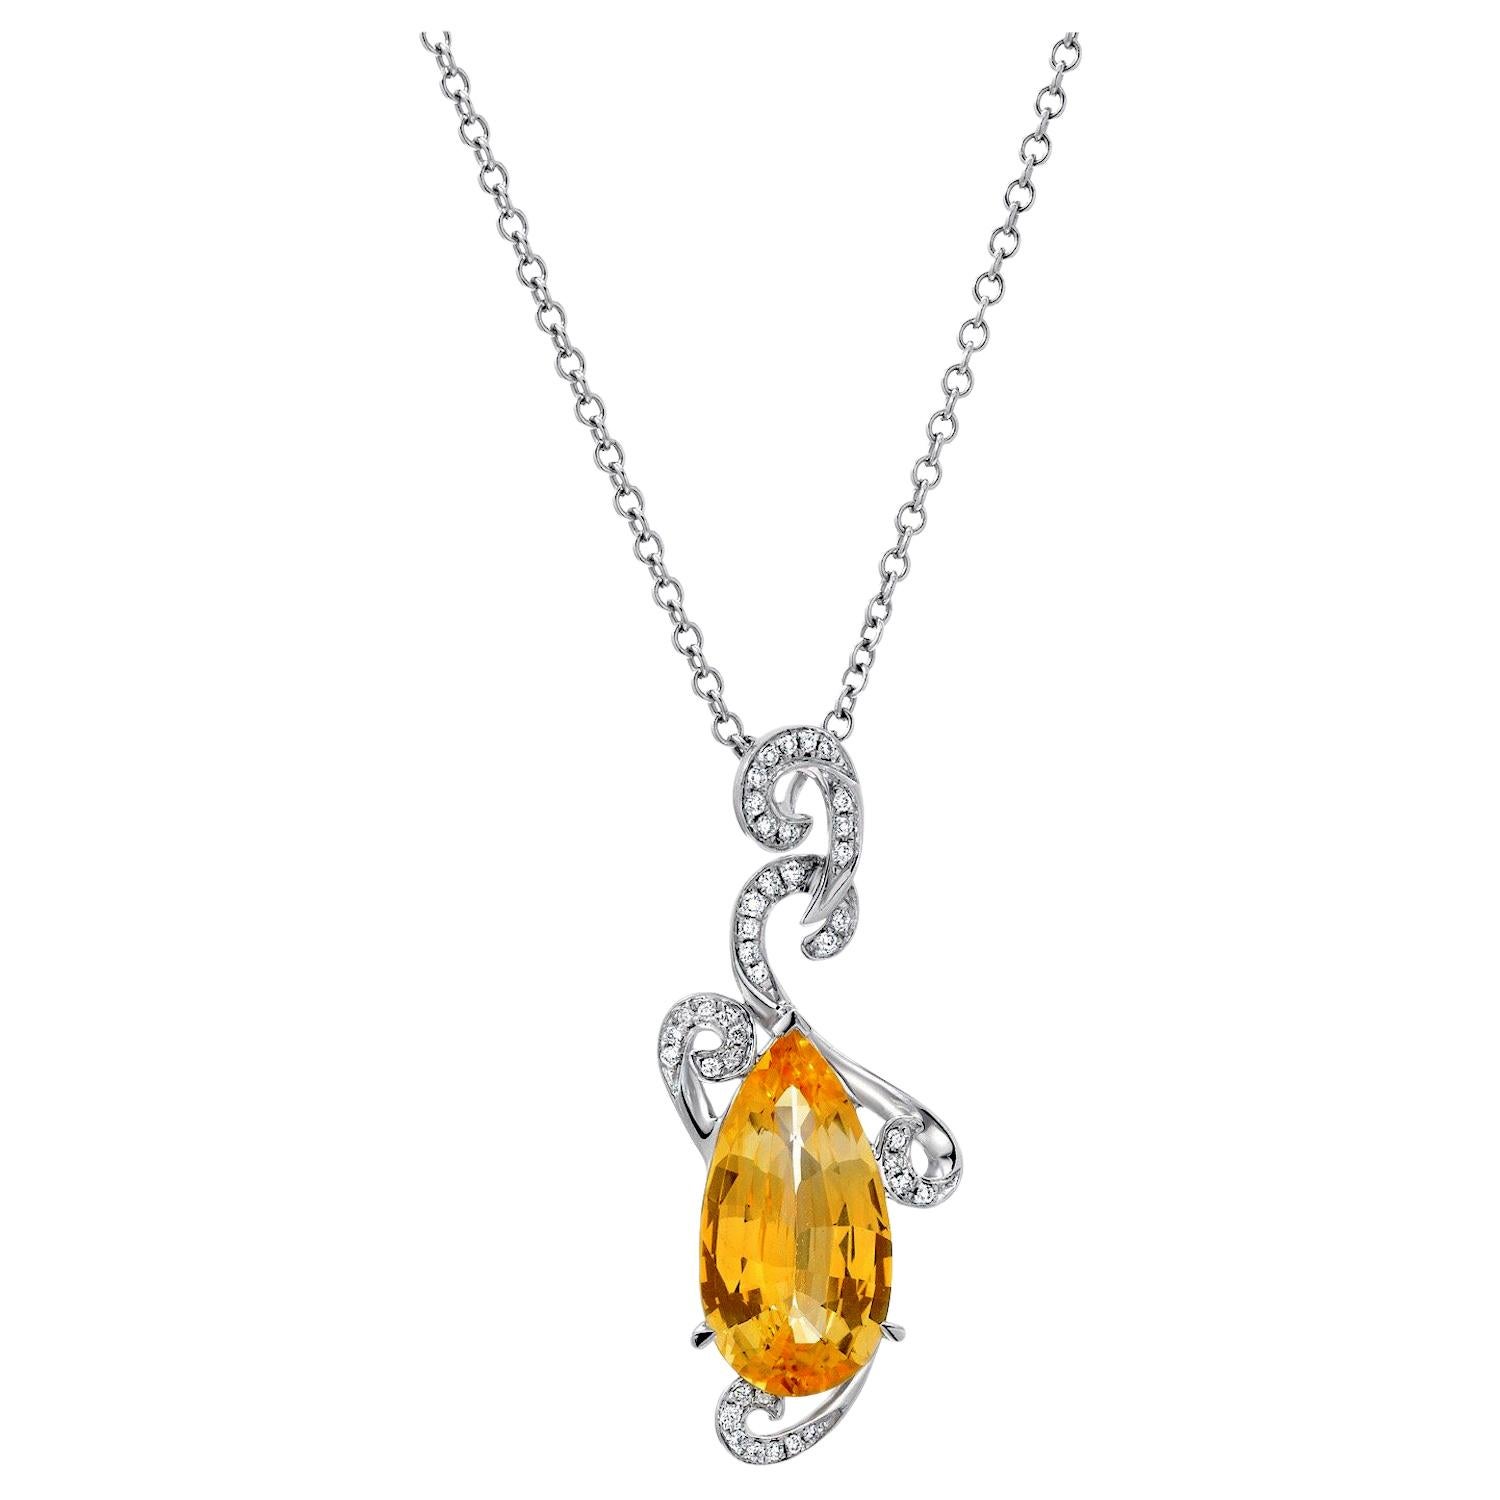 Natural, unheated 5.13 carat Ceylon Yellow Sapphire pear shape, and 0.21 carats total round brilliant diamonds, set in this modern 18K white gold diamond necklace. Chain length is 17 inches but it can be adjusted, complementary, upon request. 
GRS